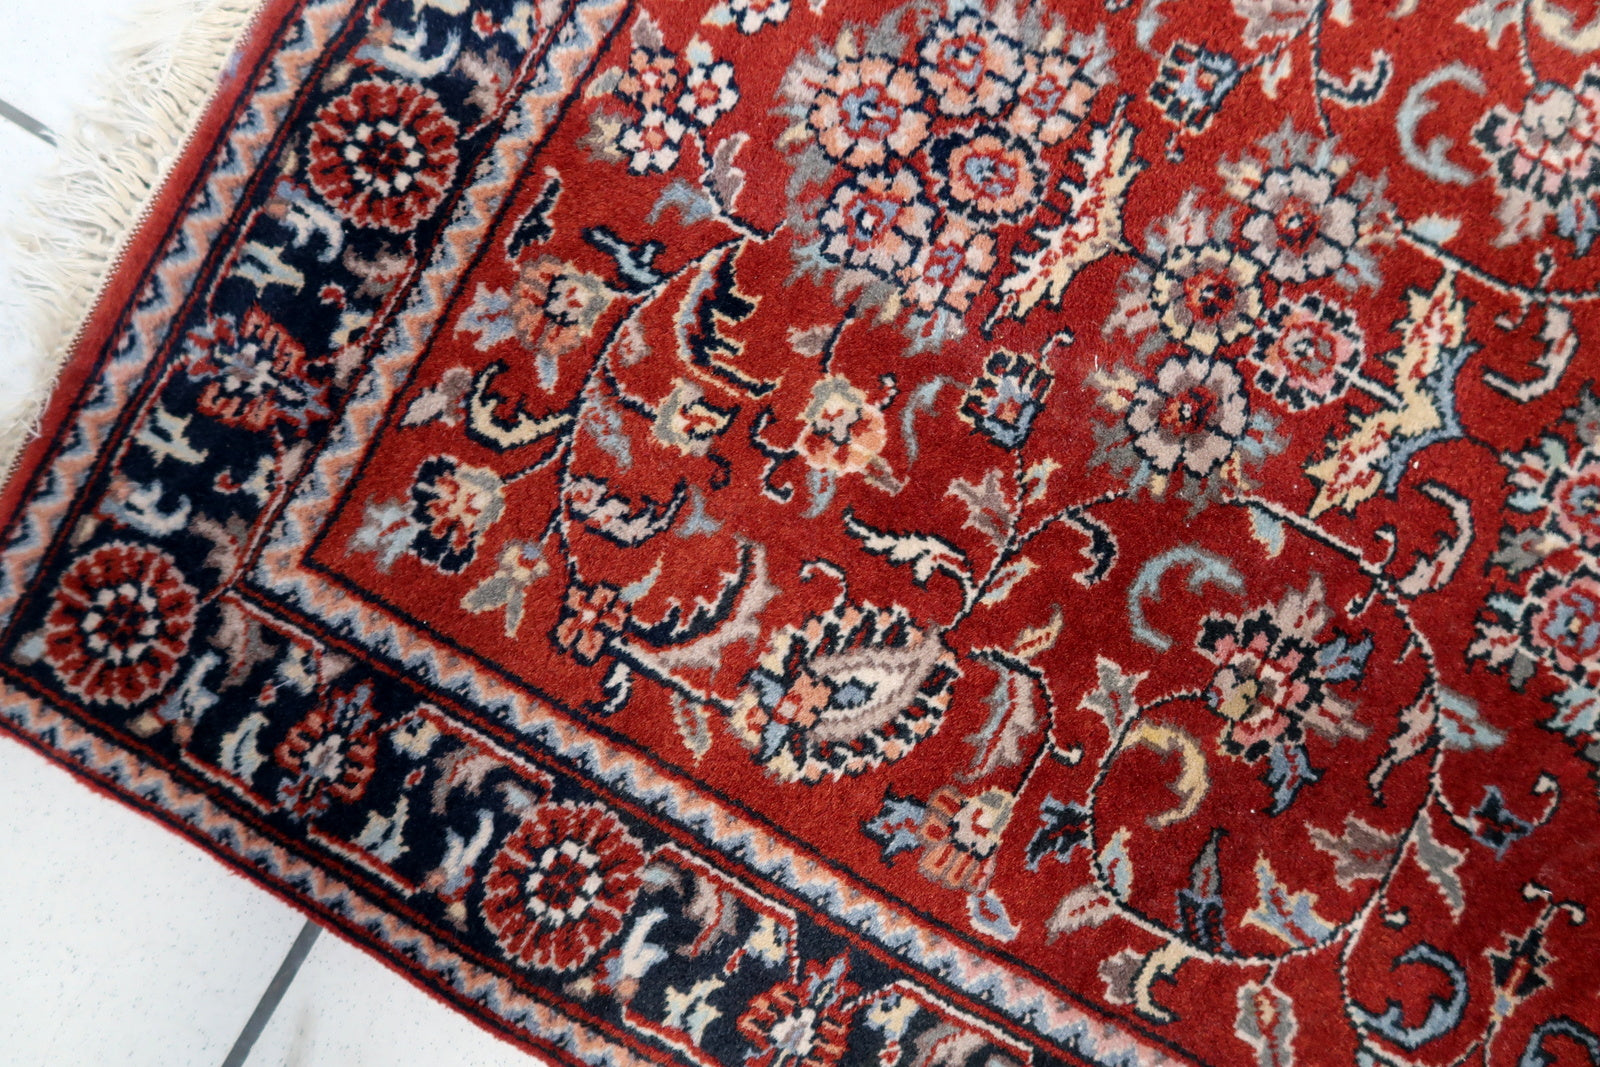 Detailed view of the multiple layers of borders surrounding the central area of the rug